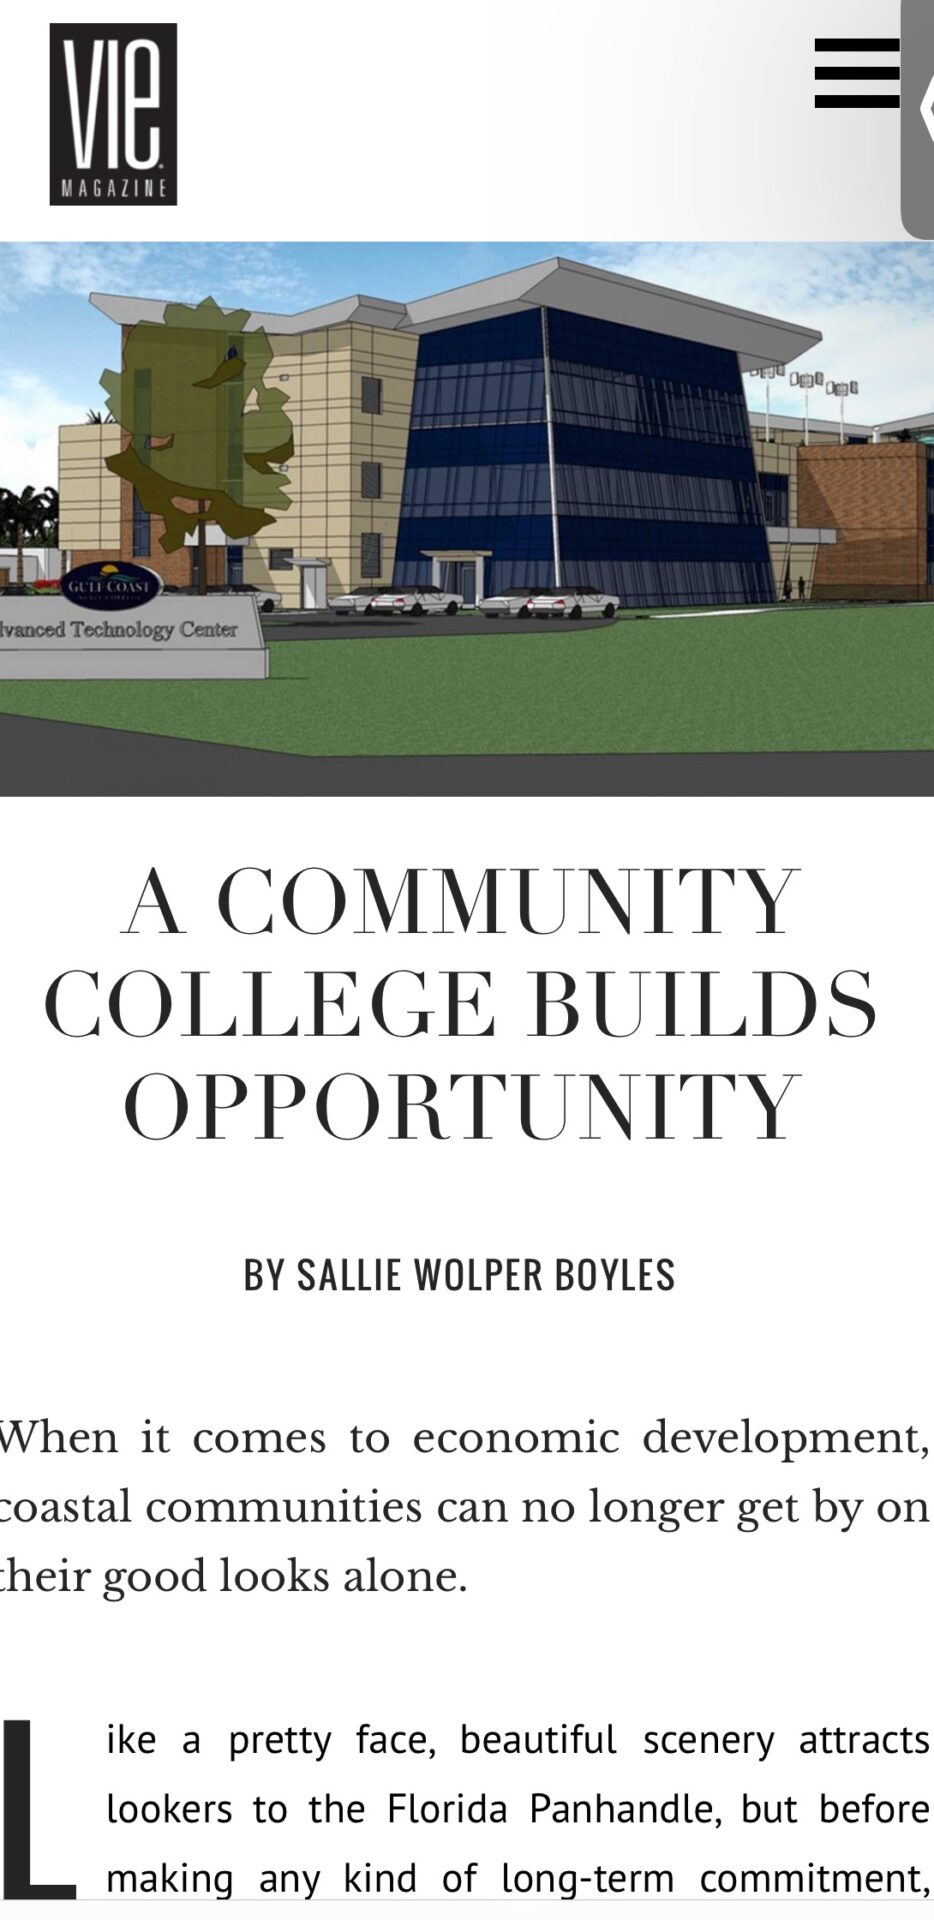 A community college builds opportunity